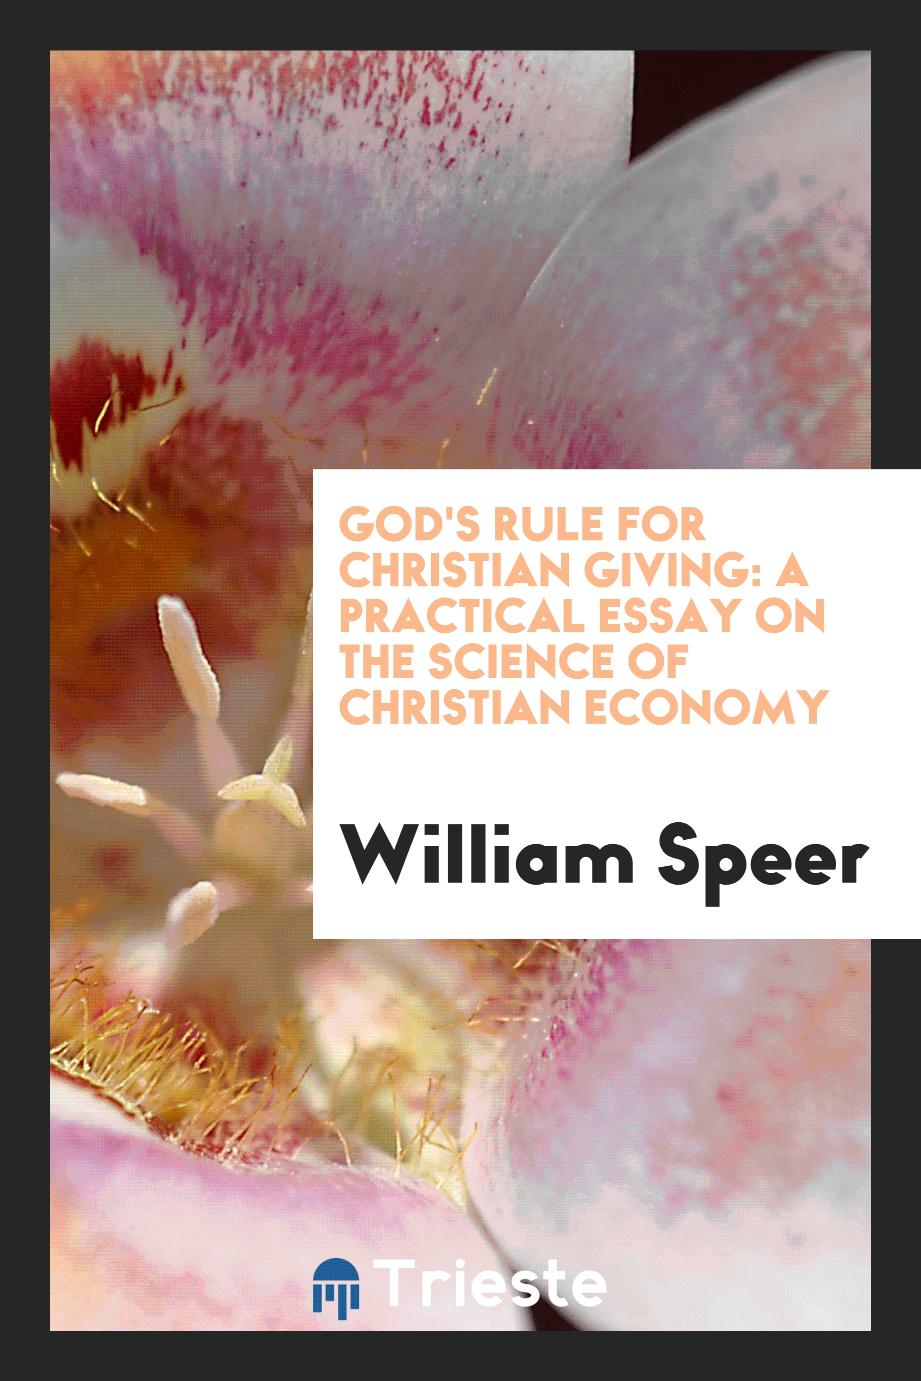 God's rule for Christian giving: a practical essay on the science of Christian economy